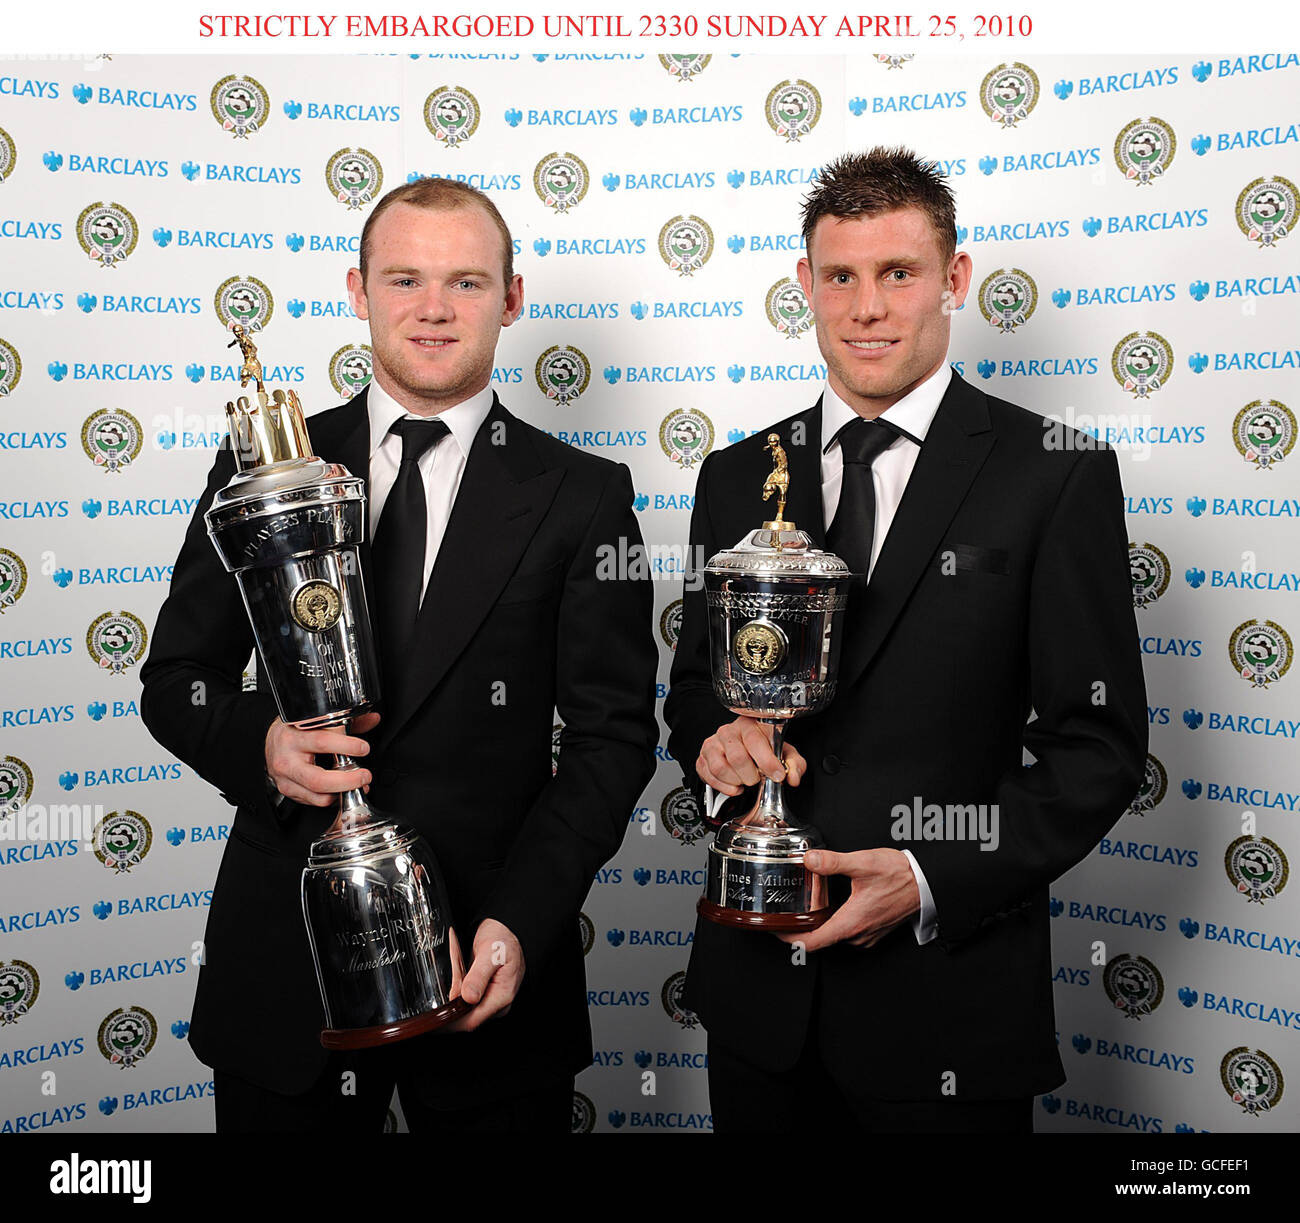 Manchester United's Wayne Rooney (left) with his trophy for PFA Players Player of the Year and Aston Villa's James Milner (right) with his trophy for Young Player of the Year, at the PFA Player of the Year Awards 2010 at the Grosvenor House Hotel, London. Stock Photo